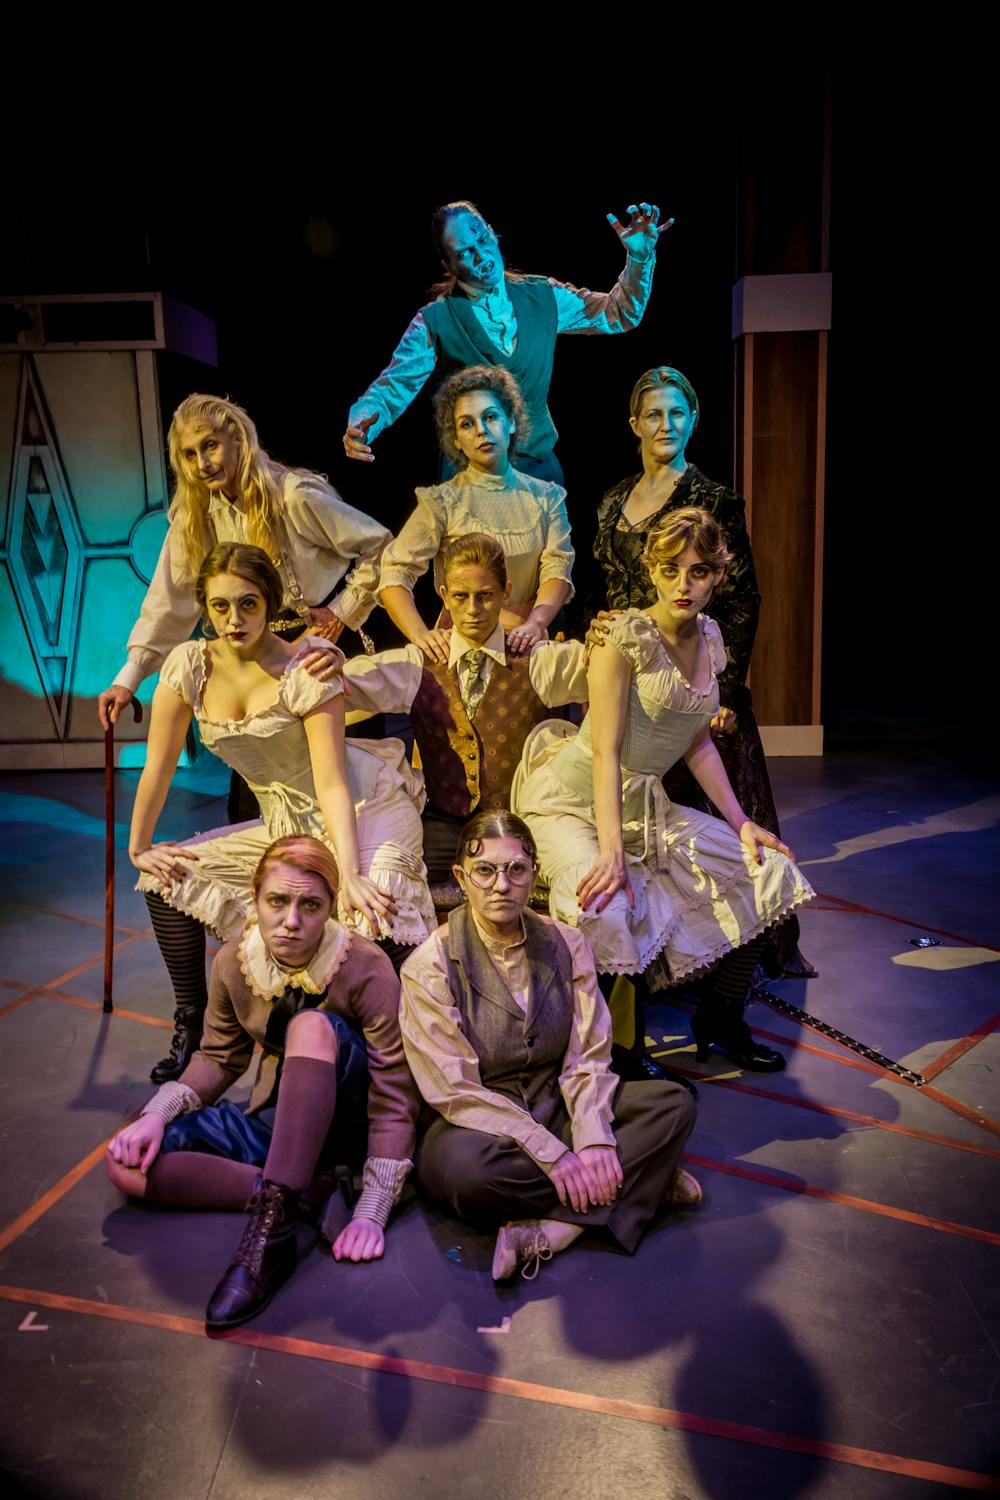 <p dir="ltr" align="justify">"All Girl Frankenstein" will premiere Friday at the Hippodrome State Theatre, 25 SE Second Place. A discounted preview will be held tonight at 8 p.m.</p>